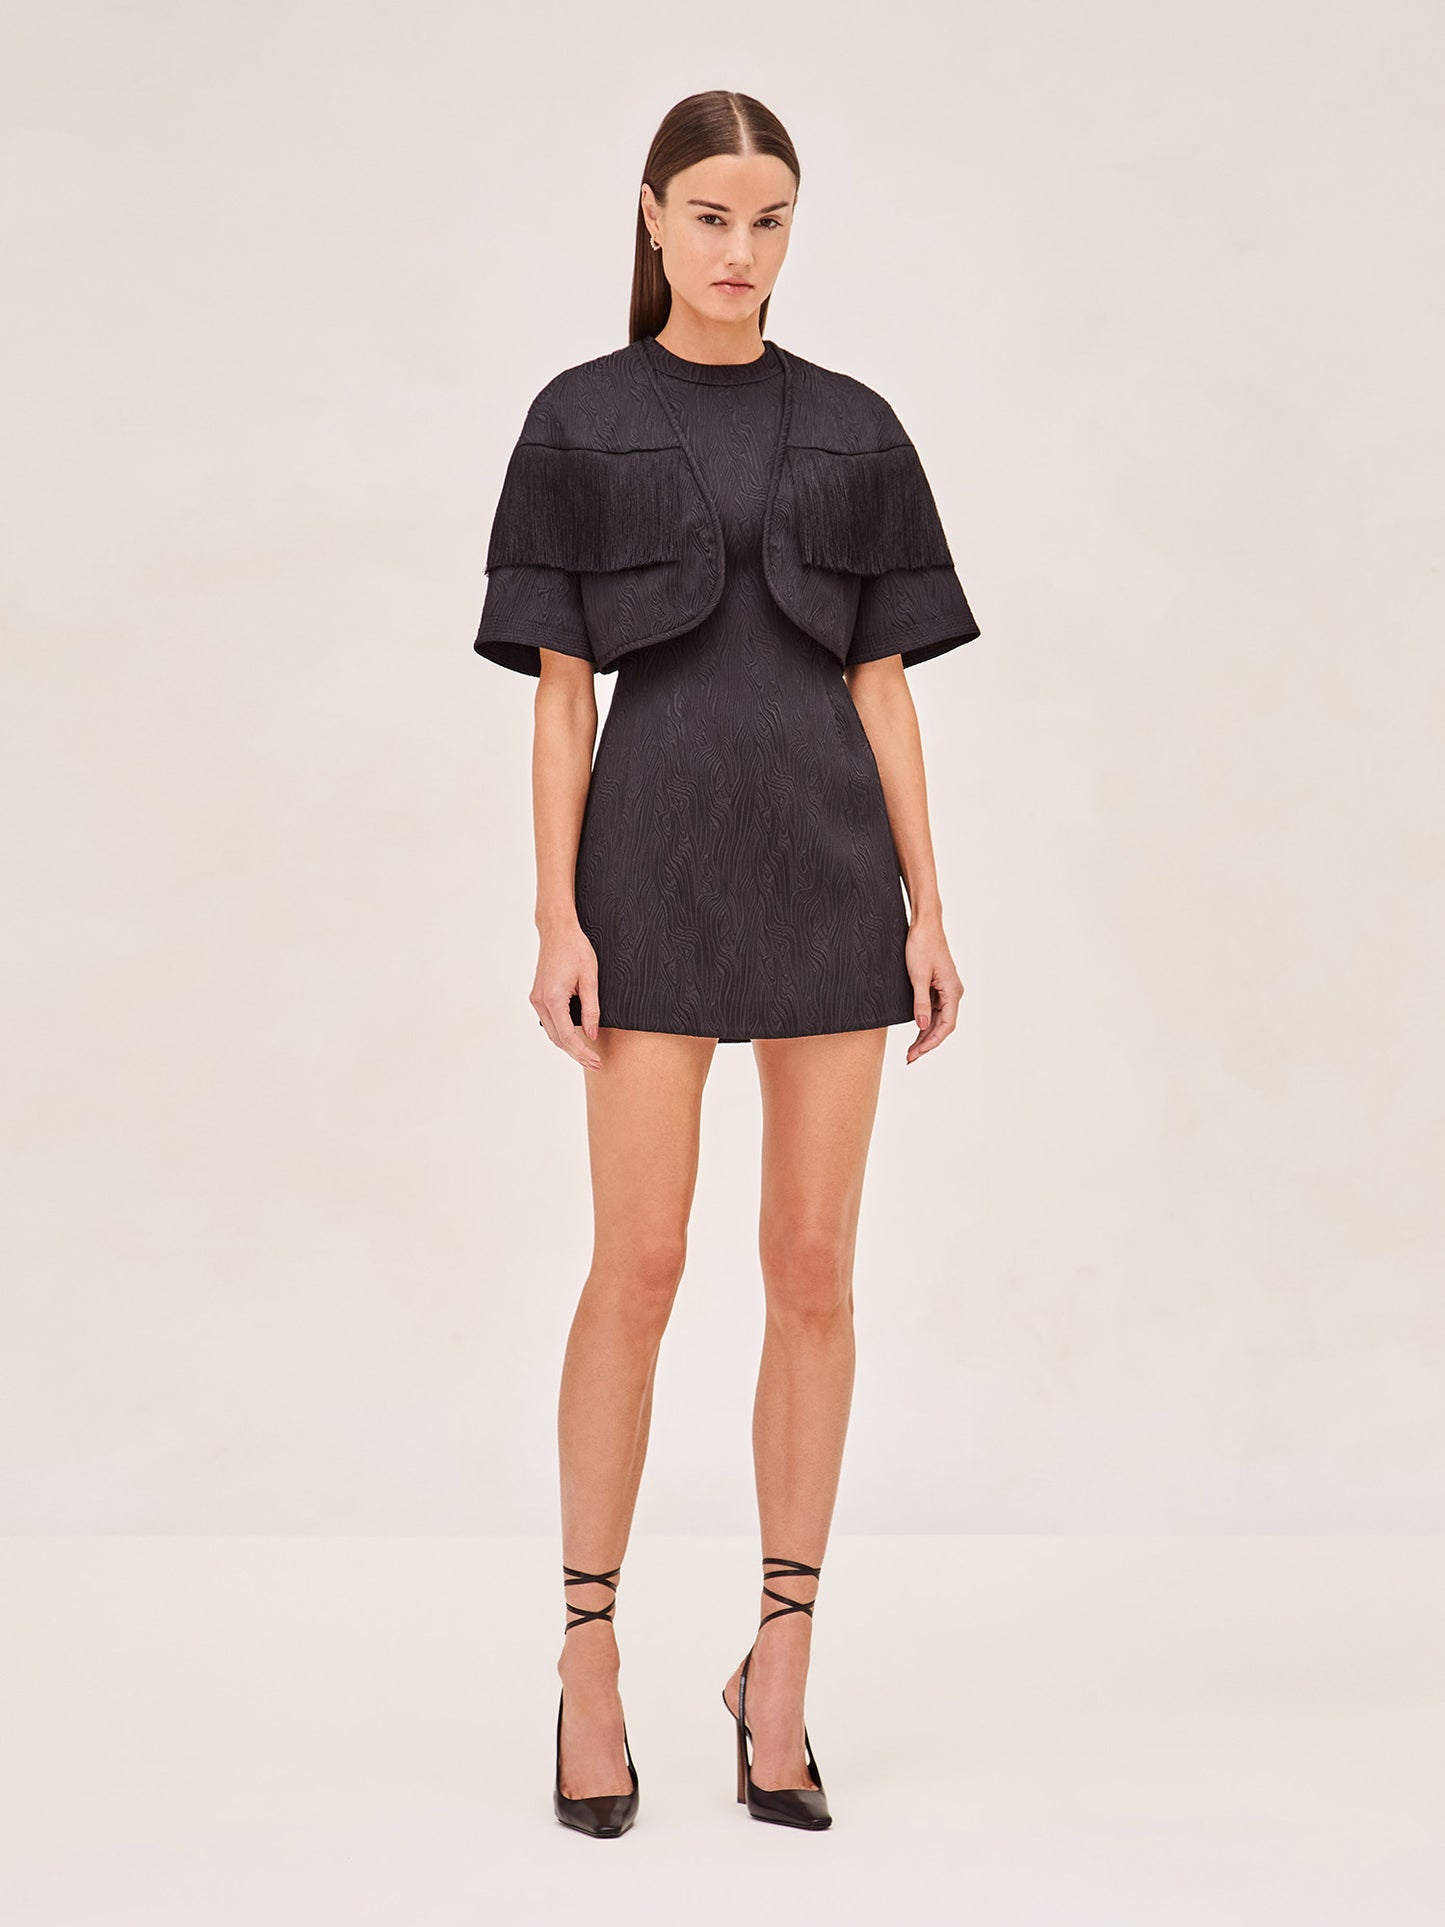 Alexis Andria sleevless mini dress in black. with taddeo fringe jacket 